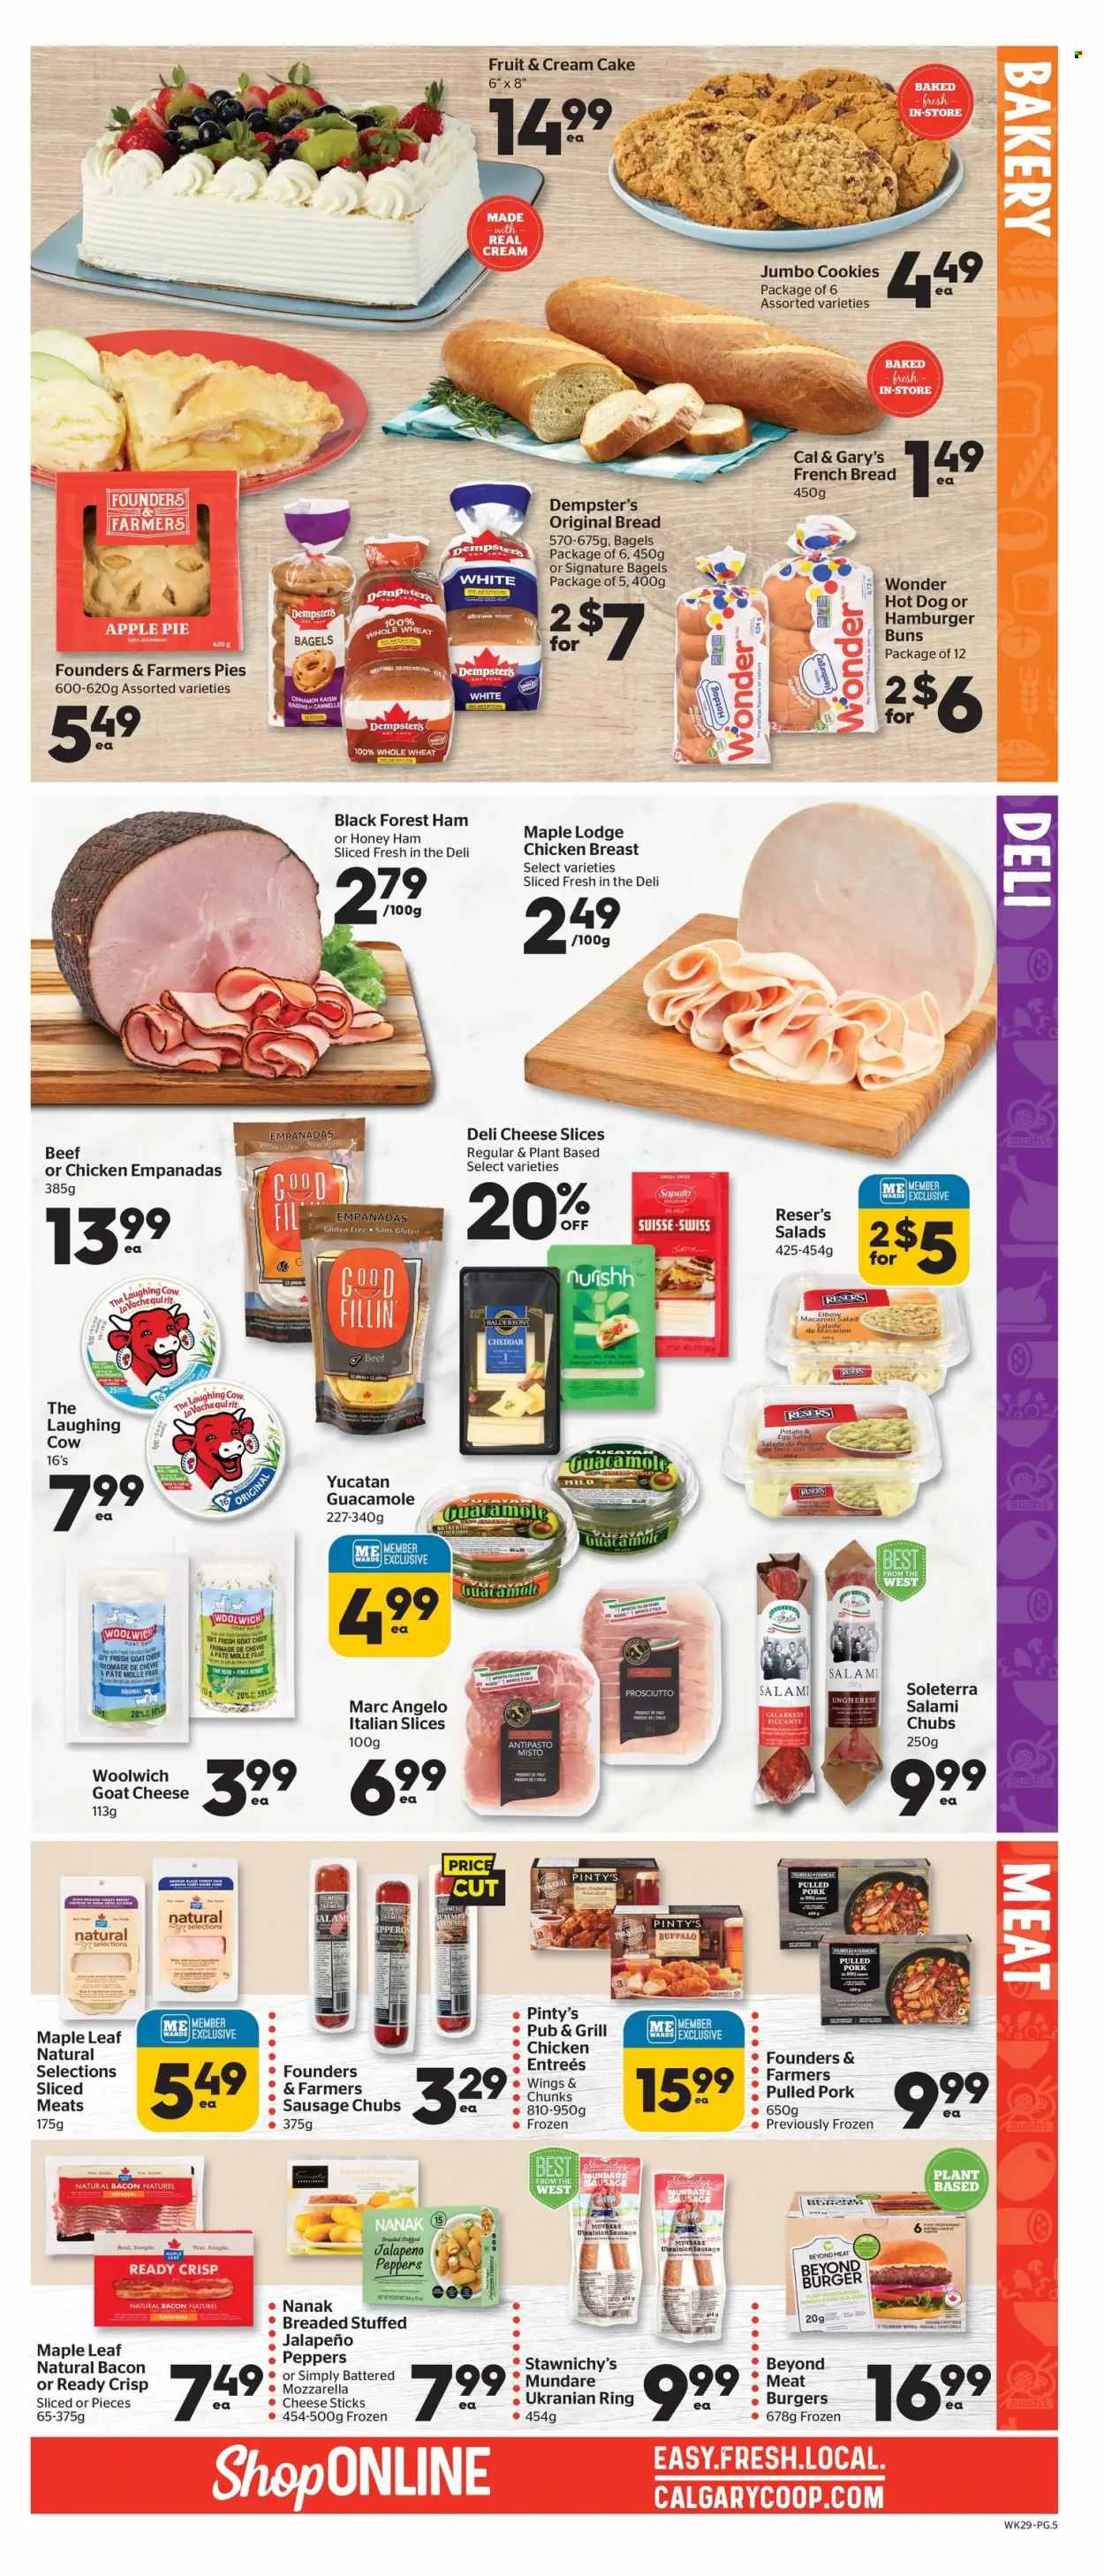 thumbnail - Calgary Co-op Flyer - May 19, 2022 - May 25, 2022 - Sales products - bagels, bread, hot dog rolls, cake, pie, buns, burger buns, french bread, apple pie, salad, jalapeño, pulled pork, empanadas, ready meal, bacon, salami, ham, prosciutto, chicken breasts, sliced meat, sausage, guacamole, antipasti, goat cheese, mozzarella, sliced cheese, cheddar, The Laughing Cow, cheese sticks, cookies. Page 5.